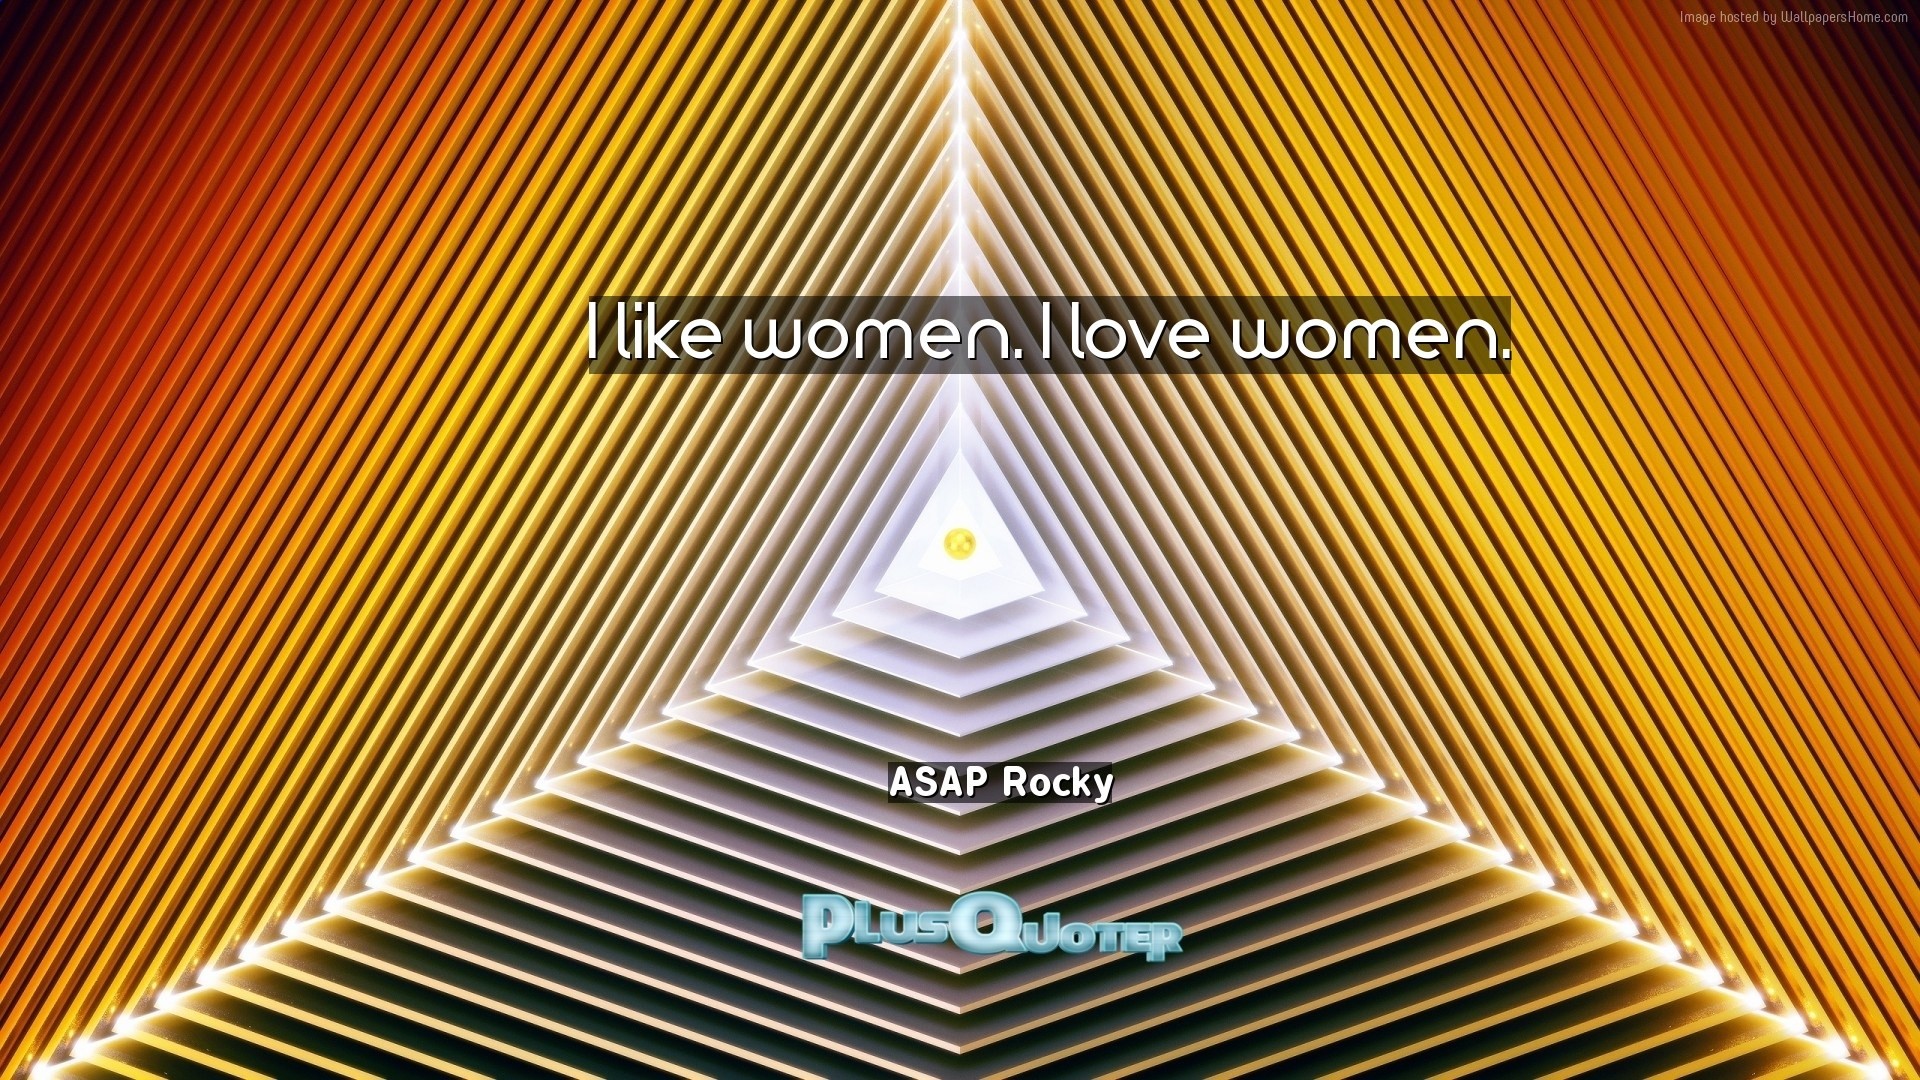 1920x1080 Download Wallpaper with inspirational Quotes- "I like women. I love women."